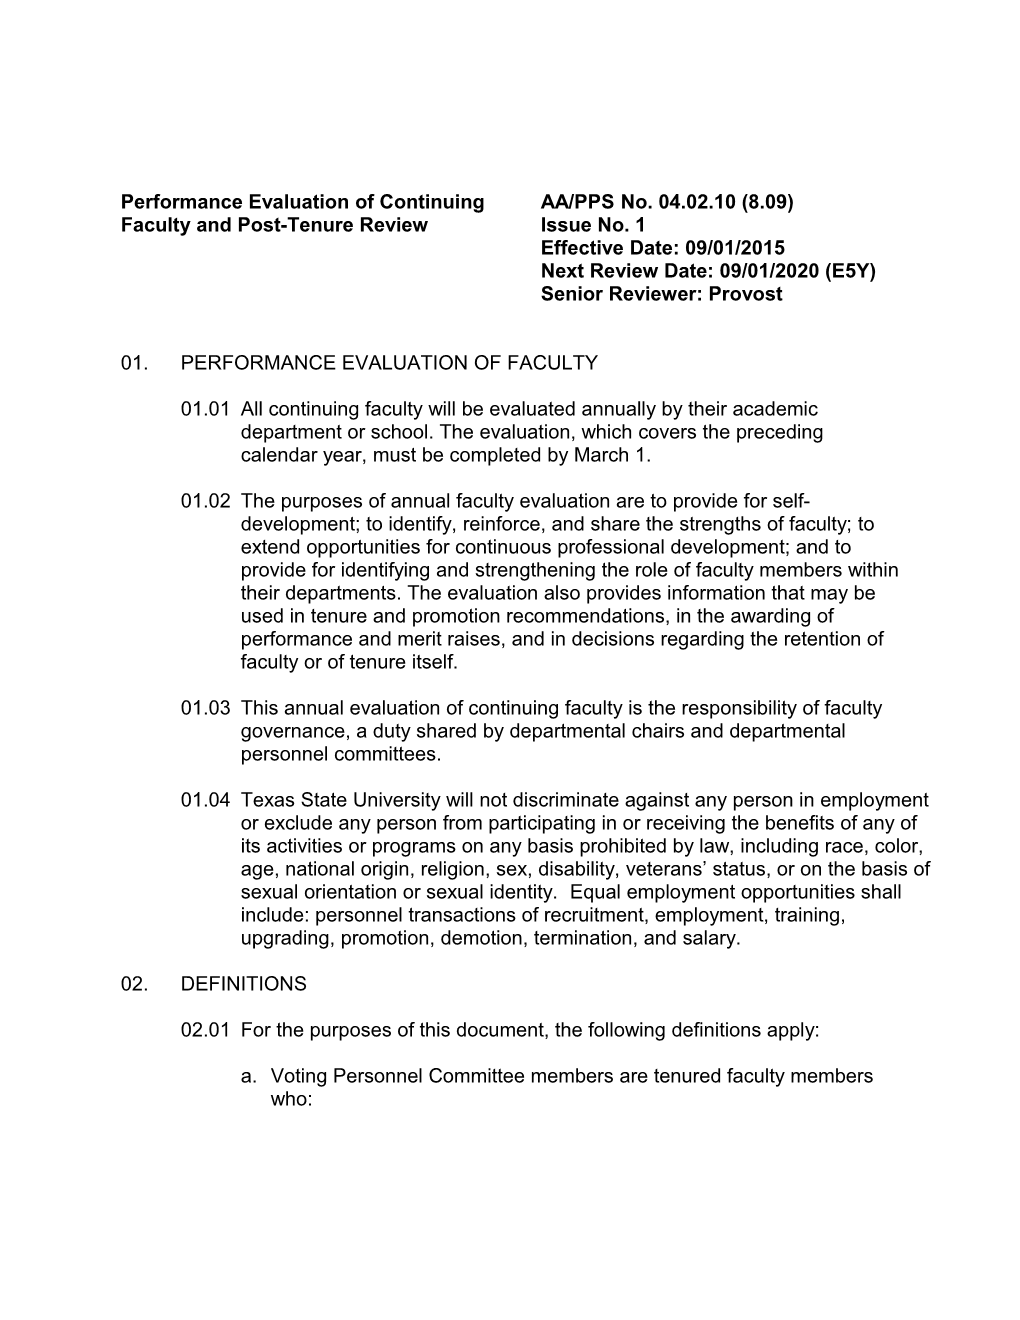 Performance Evaluation of Continuingaa/PPS No. 04.02.10 (8.09)